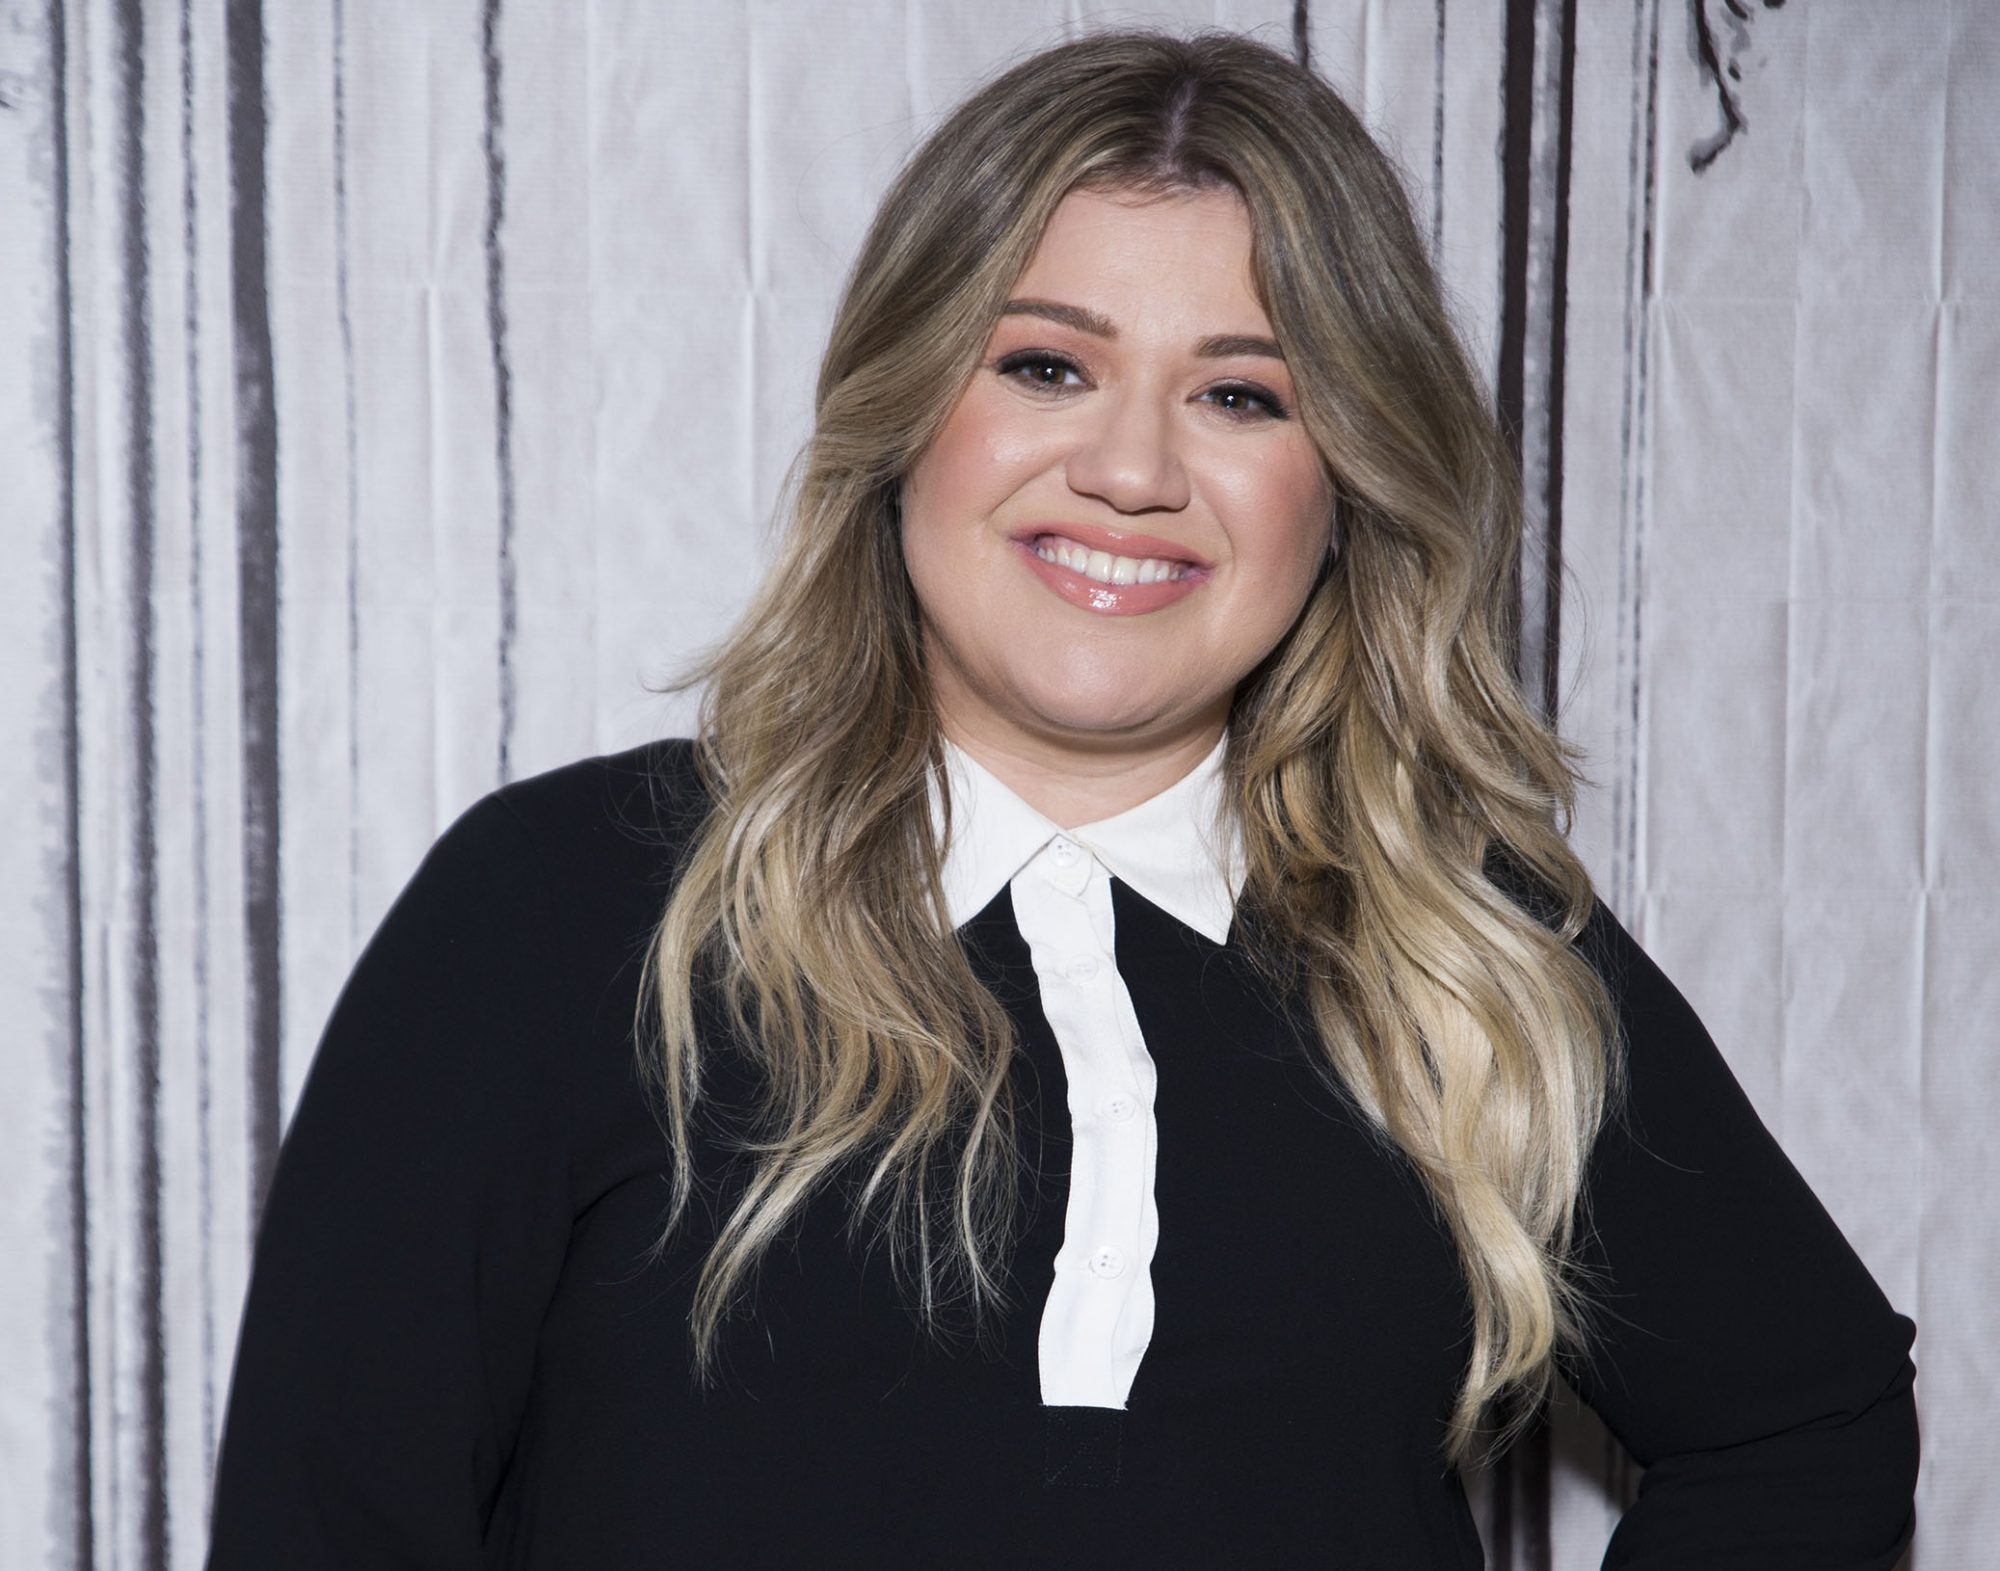 The Build Series Presents Kelly Clarkson  Discussing Her New Book "River Rose And The Magical Lullaby"